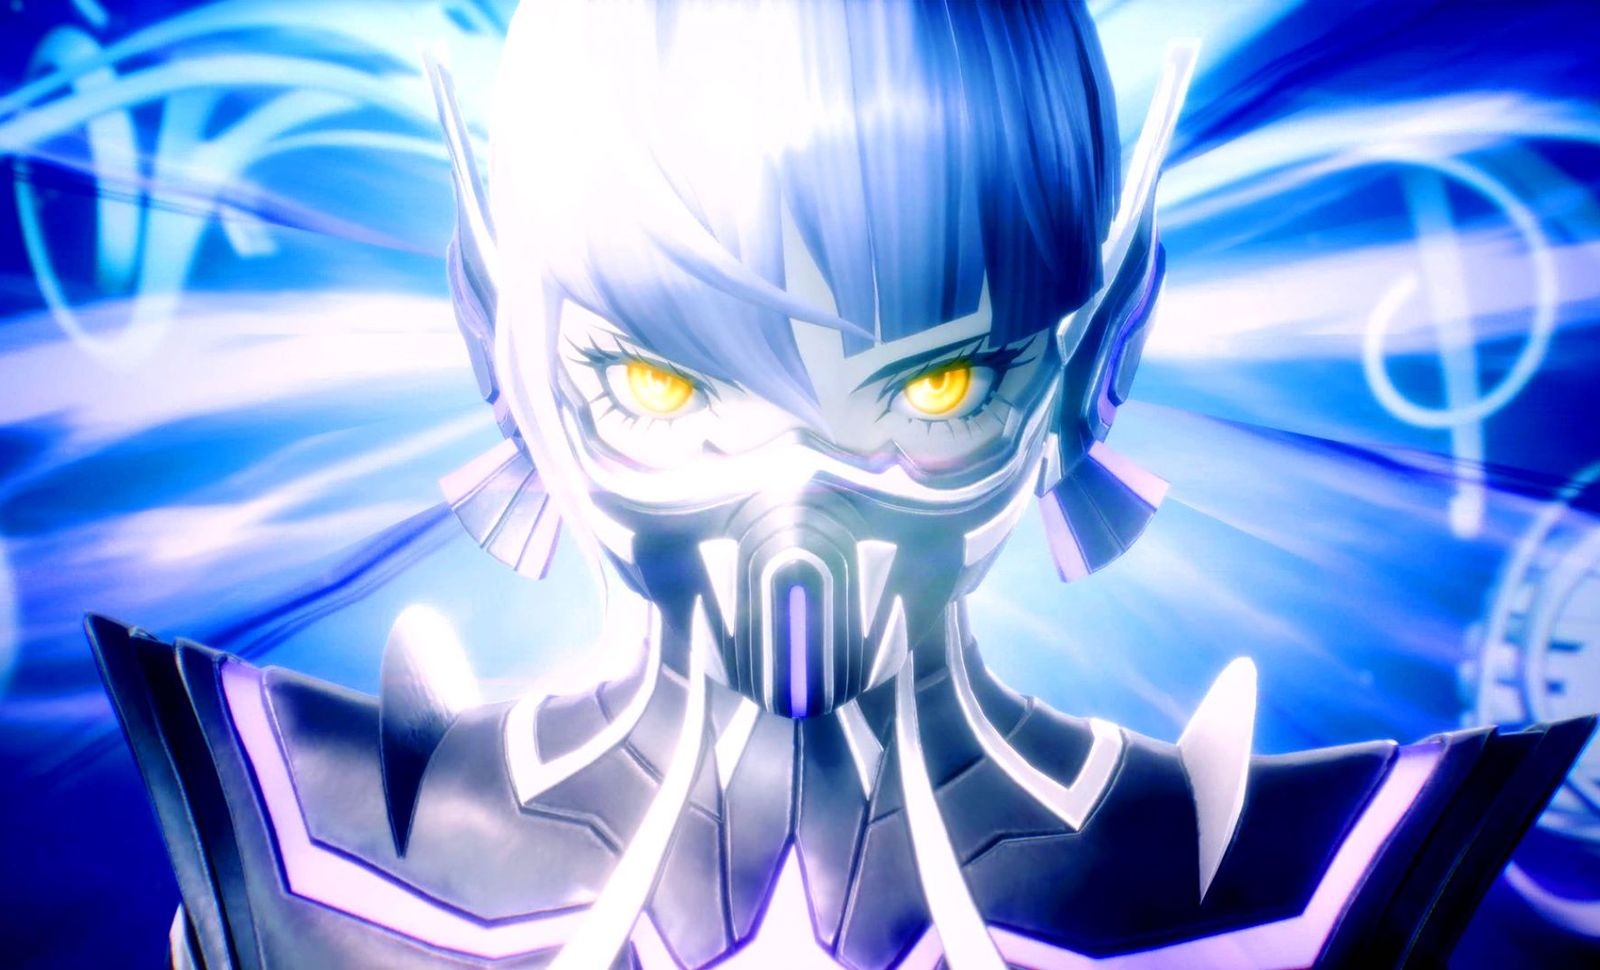 A SMT V: Vengeance close-up of a character with blue hair and orange eyes